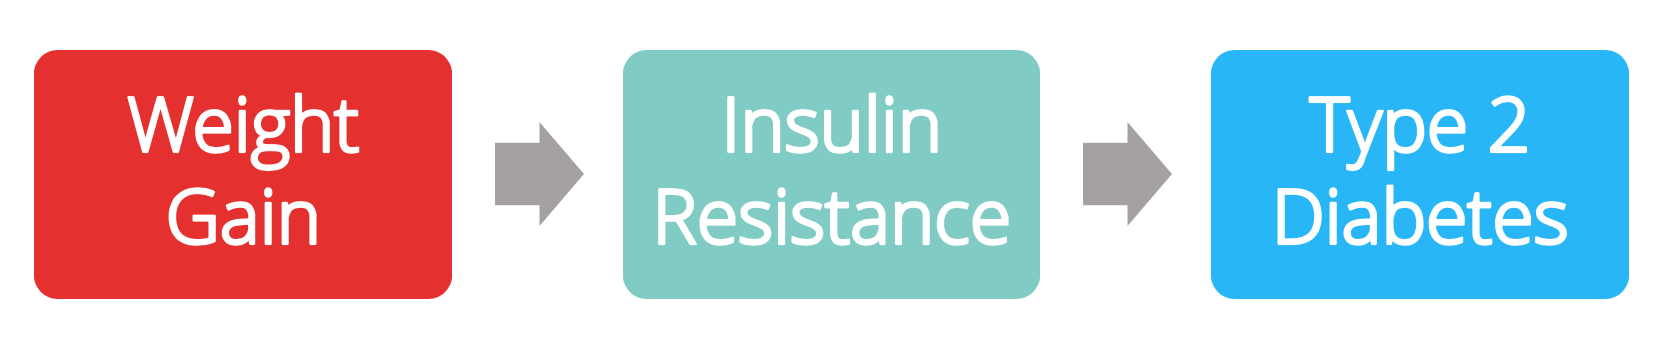 illustration suggesting that weight gain leads to insulin resistance which leads to type 2 diabetes. 